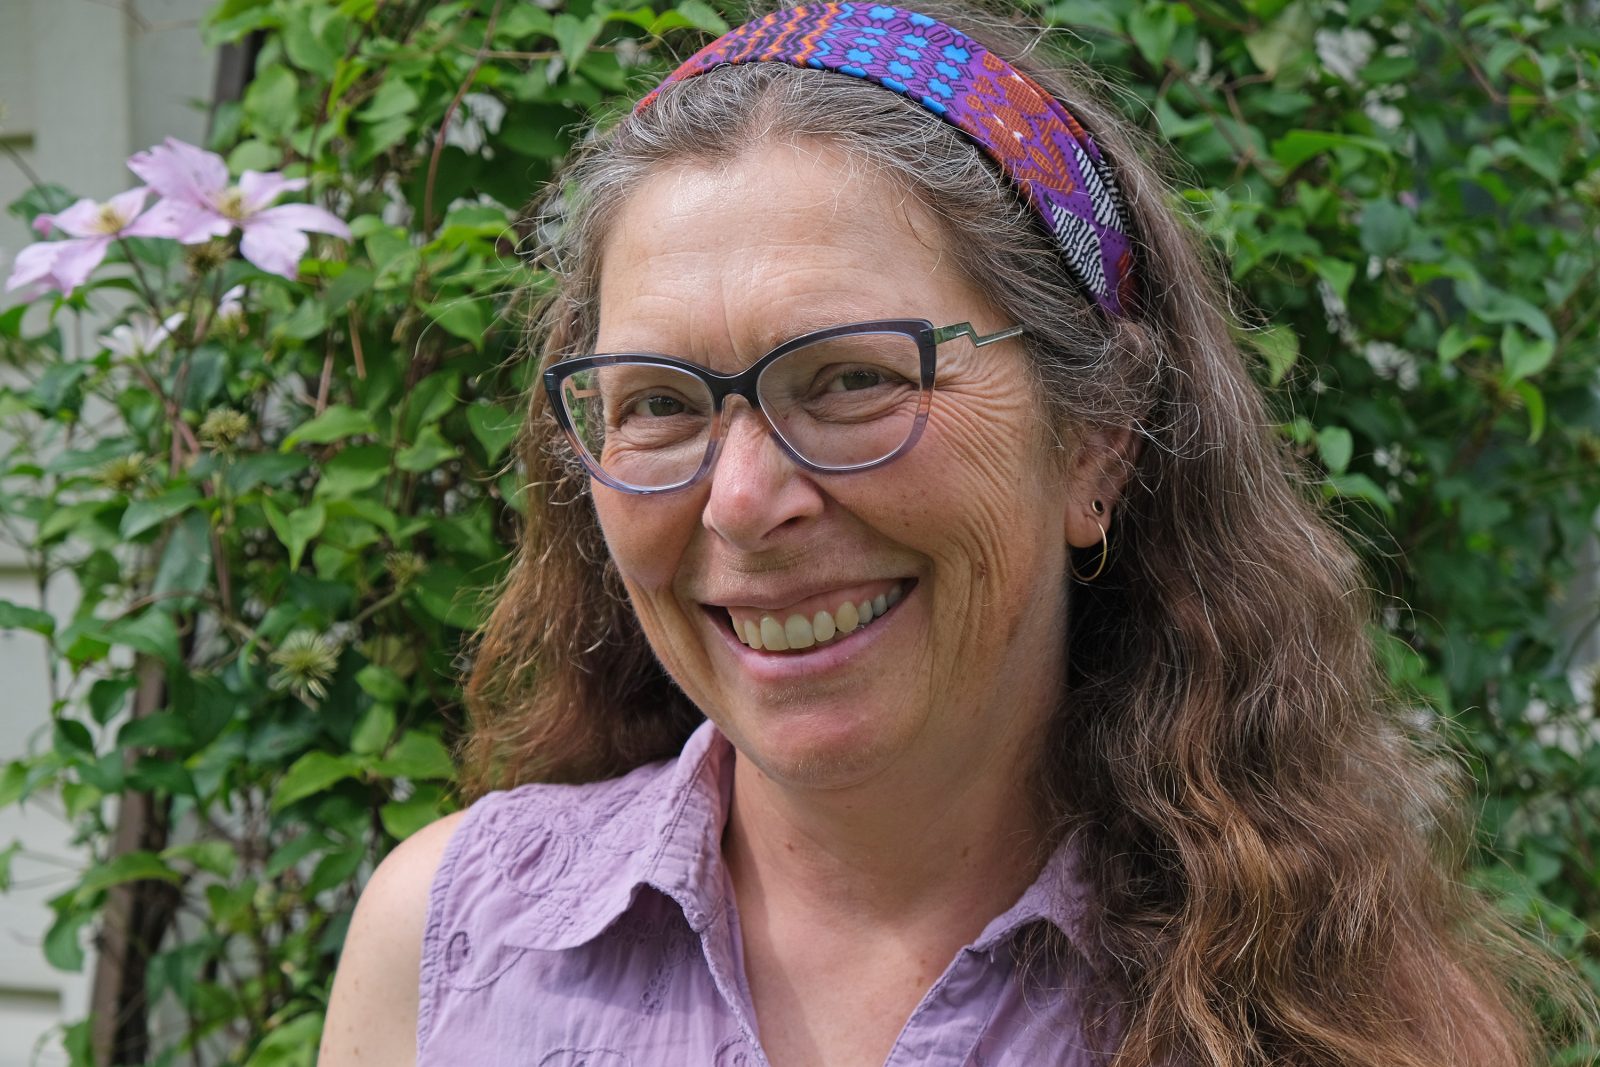 Miriam Richards headshot, standing in front of green foliage wall wearing purple shirt with matching patterned headband and dark frame glasses.